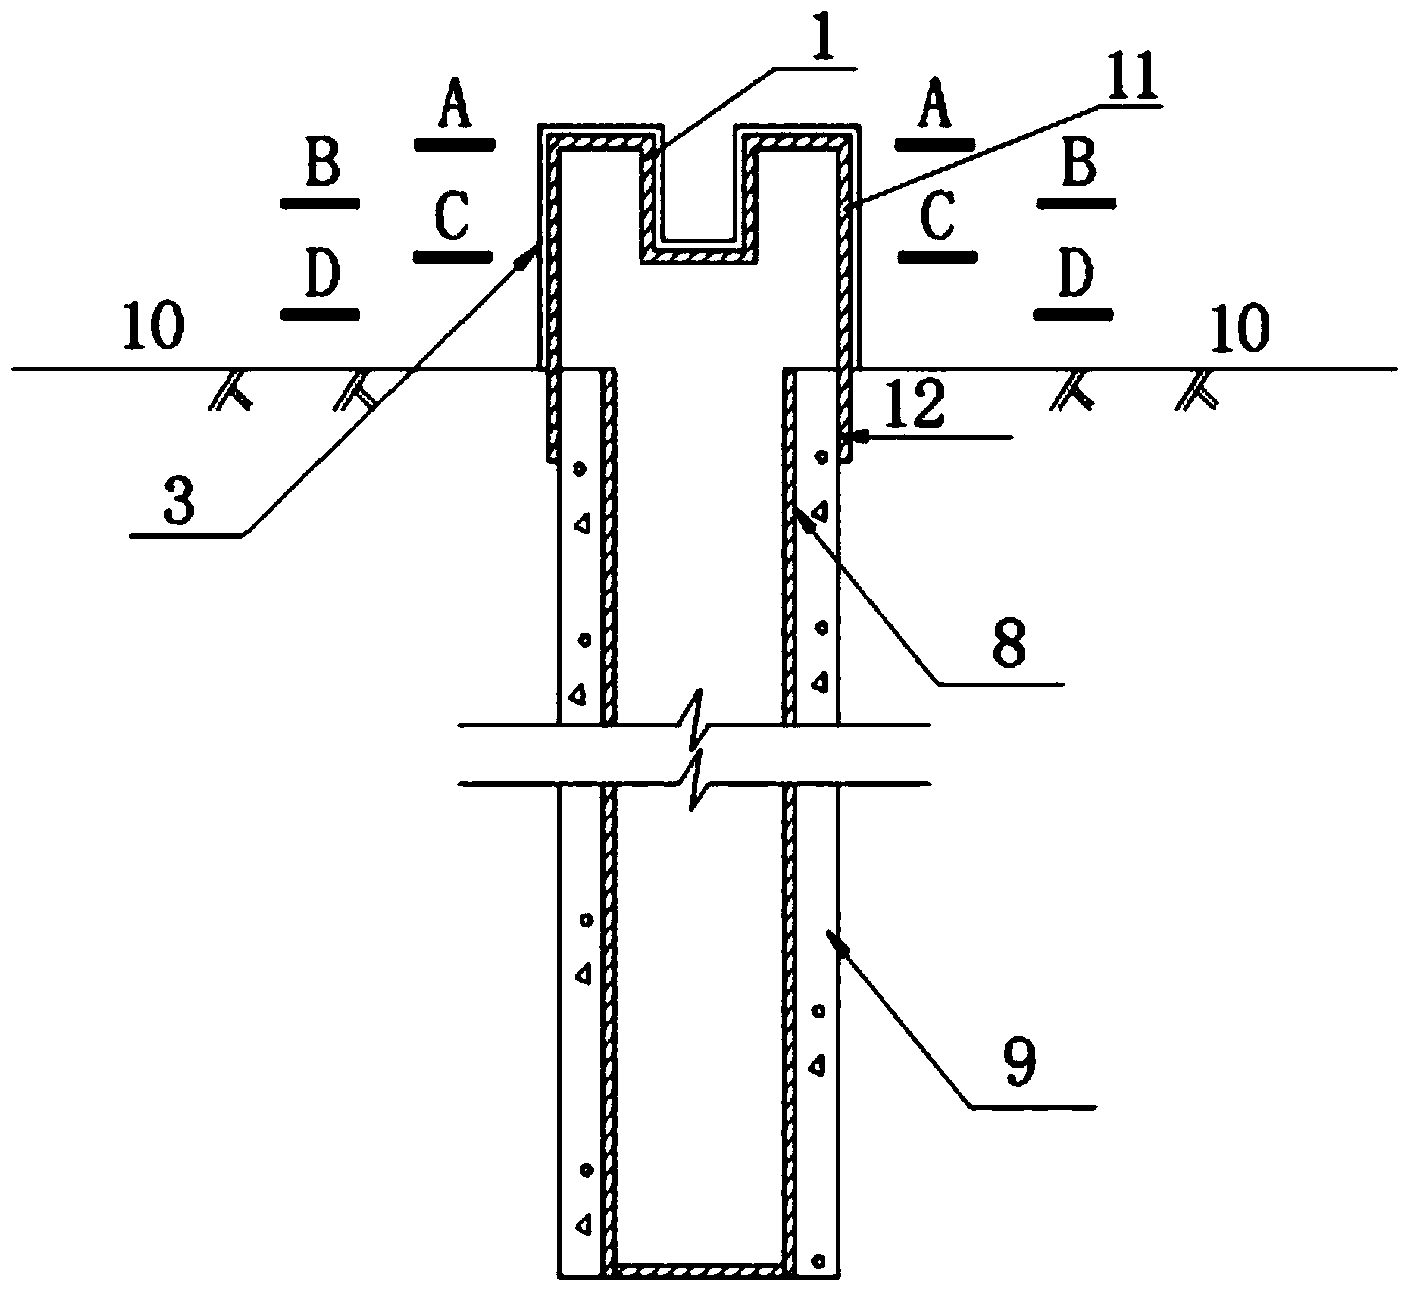 Rectangular dual-type self-infiltrating reverse-filtering recharge well mouth device